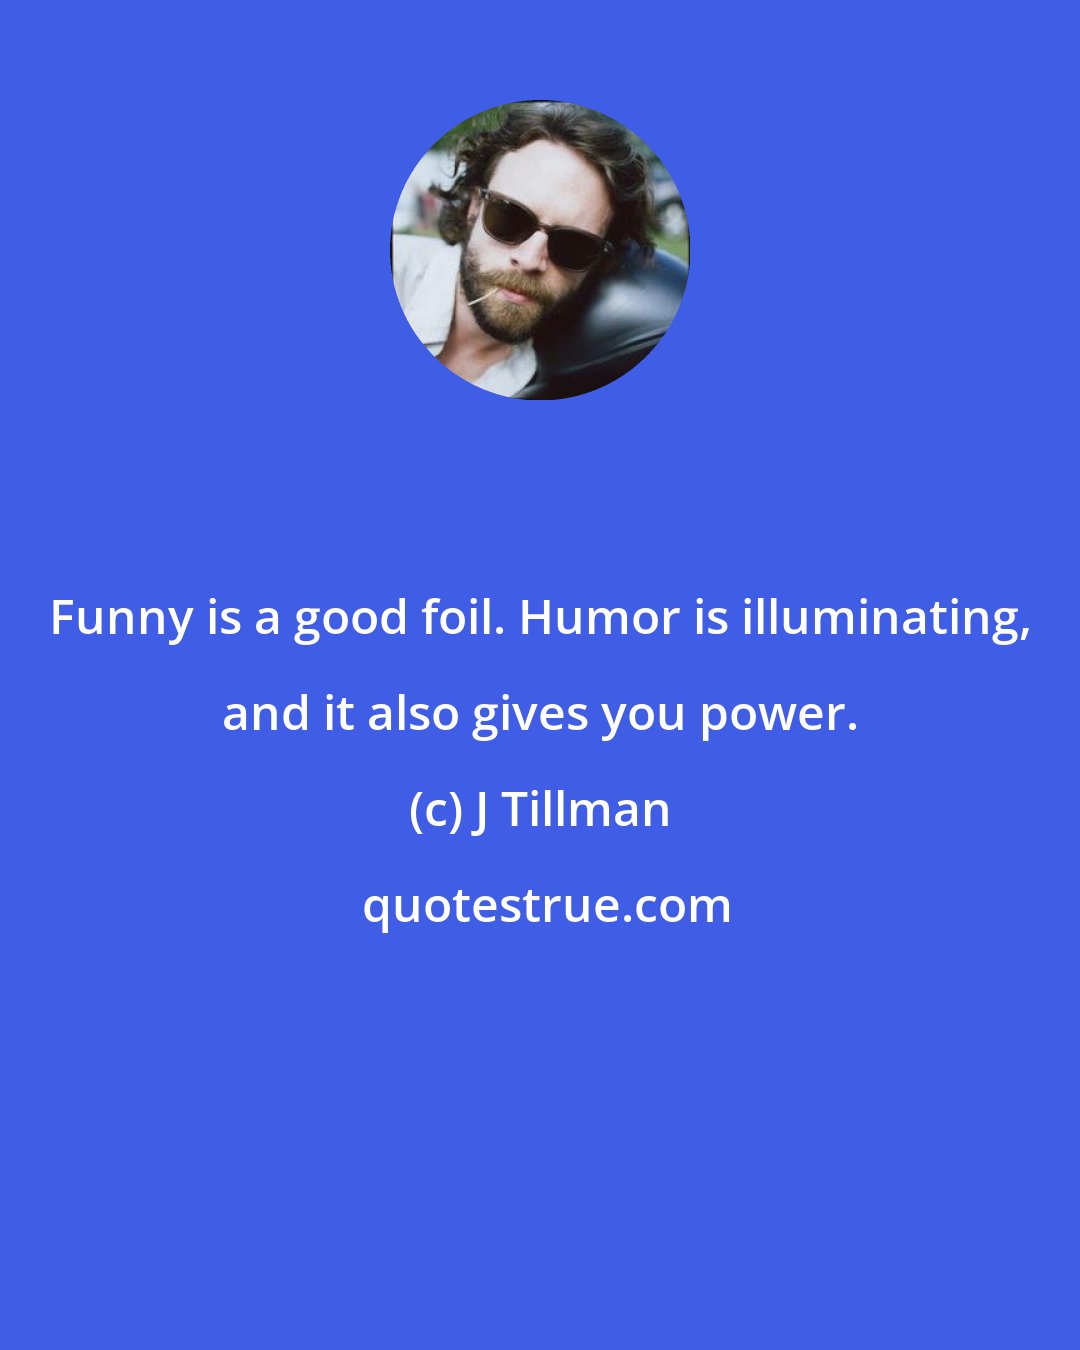 J Tillman: Funny is a good foil. Humor is illuminating, and it also gives you power.